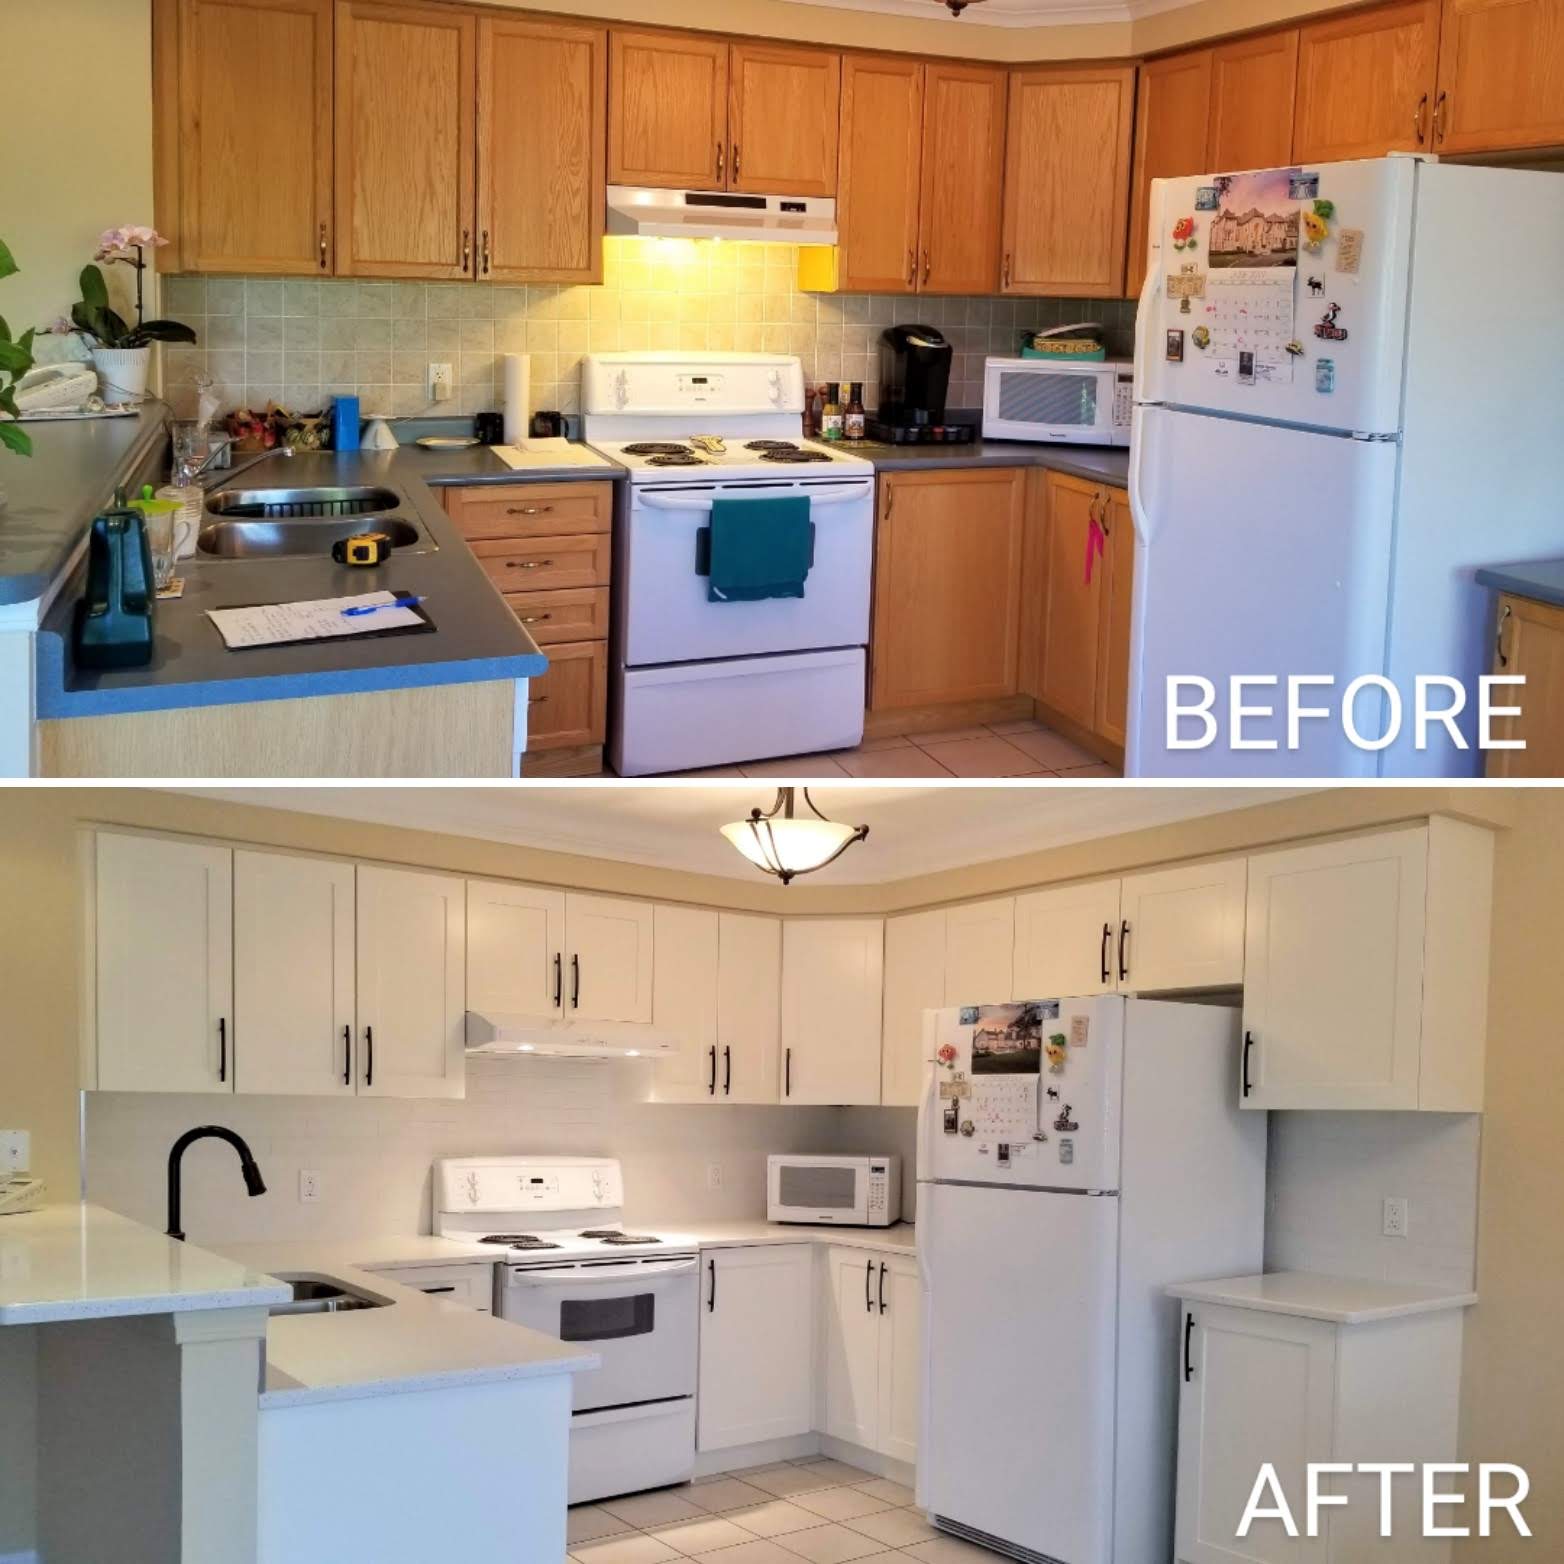 Before and after kitchen upgrade